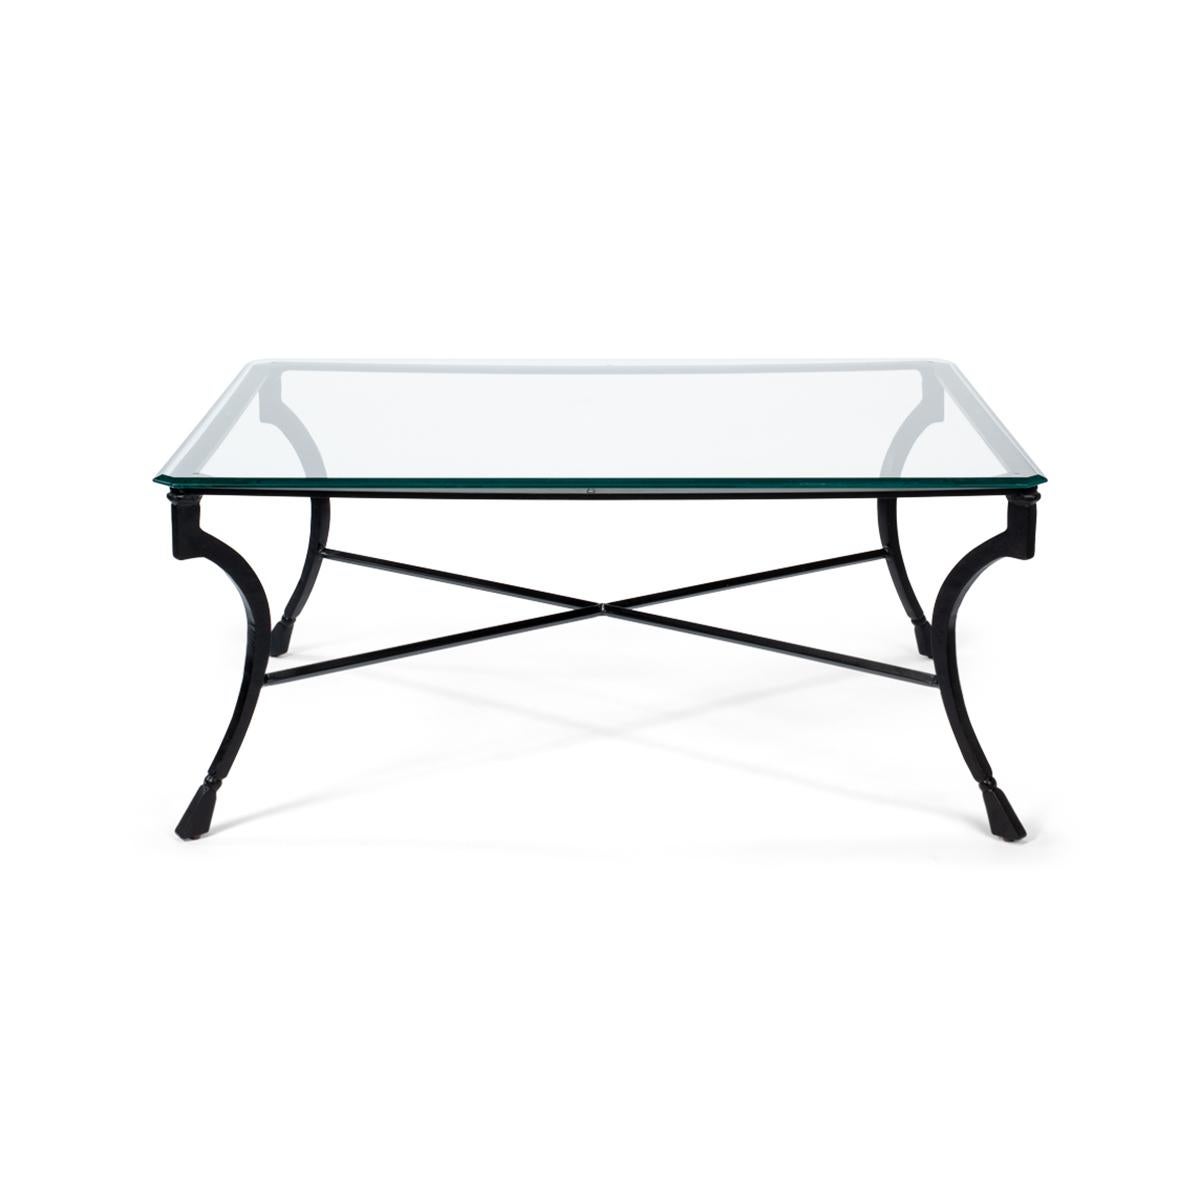 With a thick beveled edge glass top on an iron base with a classic form on curved legs and an x-form stretcher.

Dimensions: 48